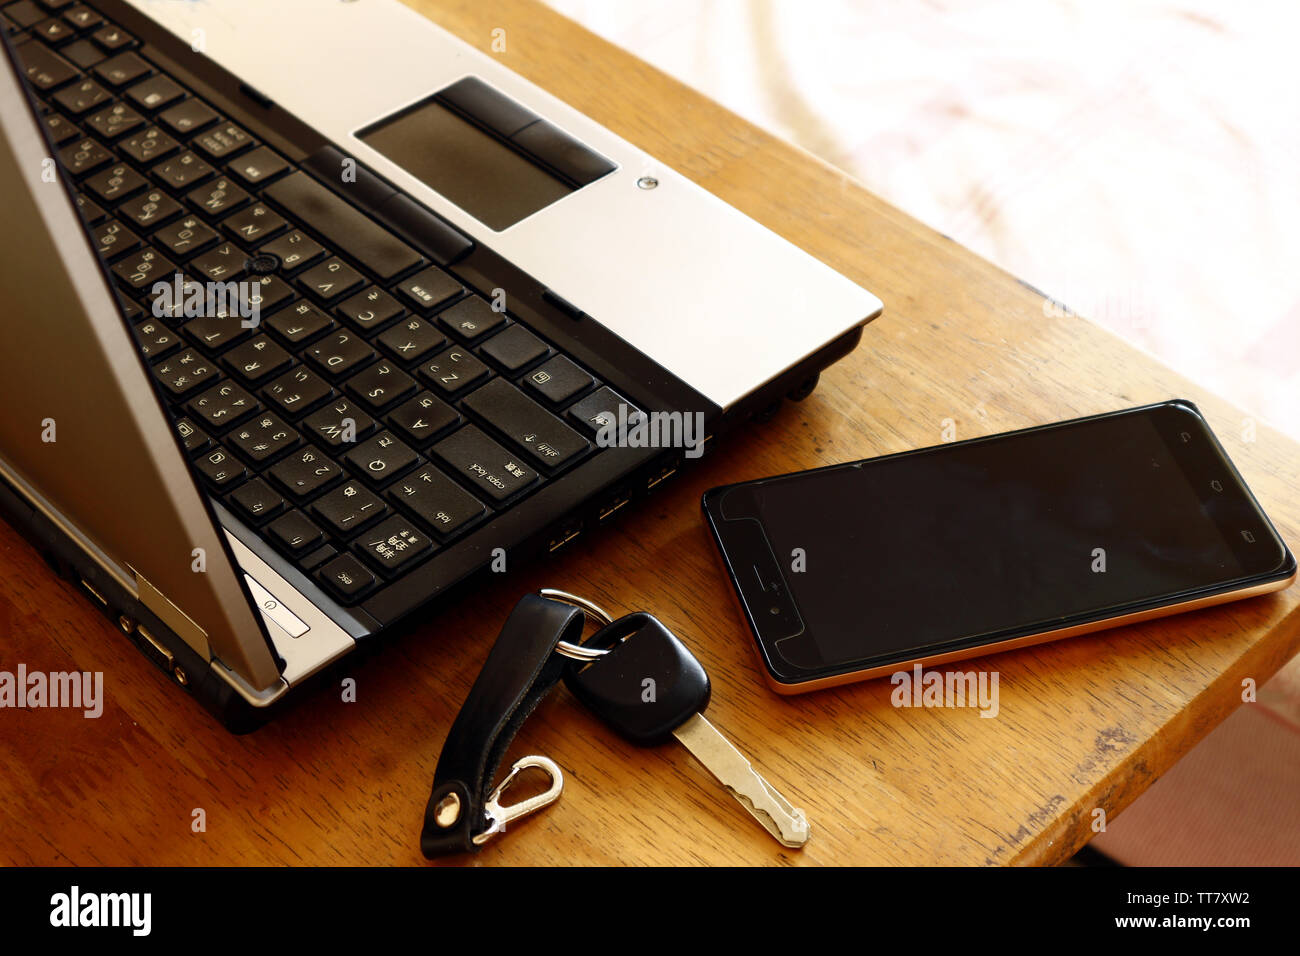 Photo Of A Laptop Computer Car Key And Smartphone On A Table